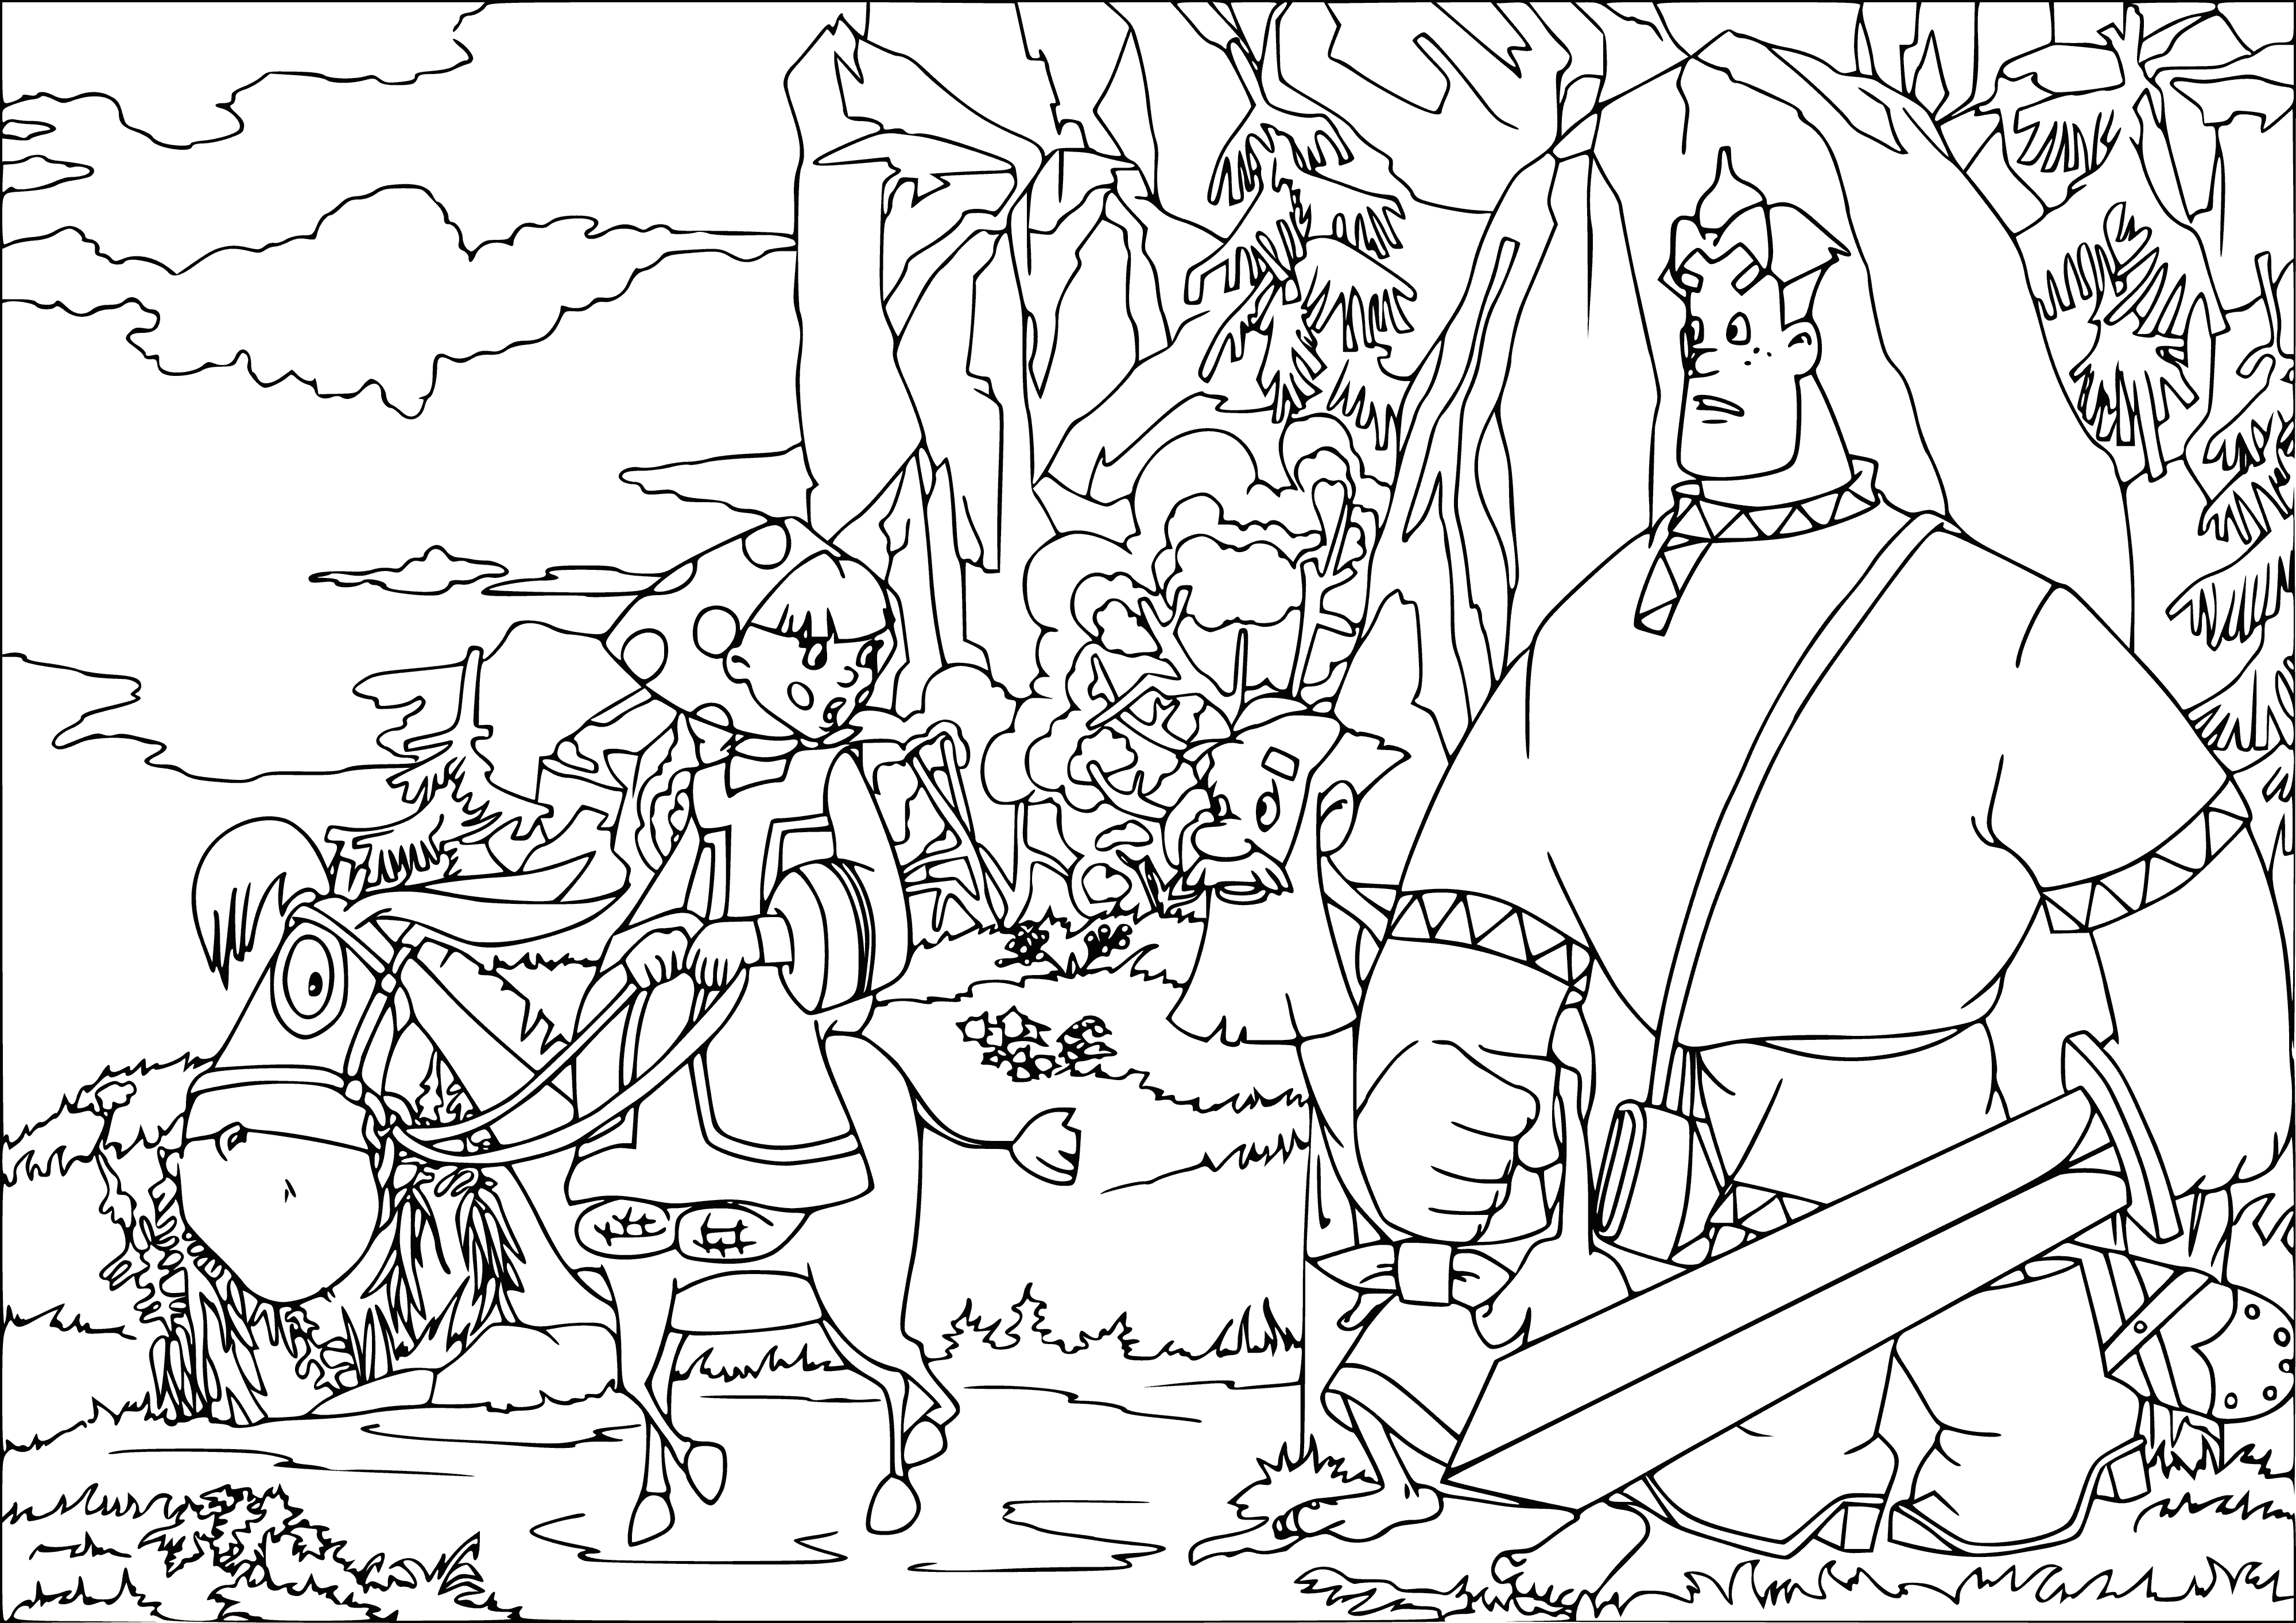 coloring page: Alyosha Popovich and Tugarin the serpent stare at viewer, Alyosha holding a spear, Tugarin wrapped around his body, both standing on a stone.